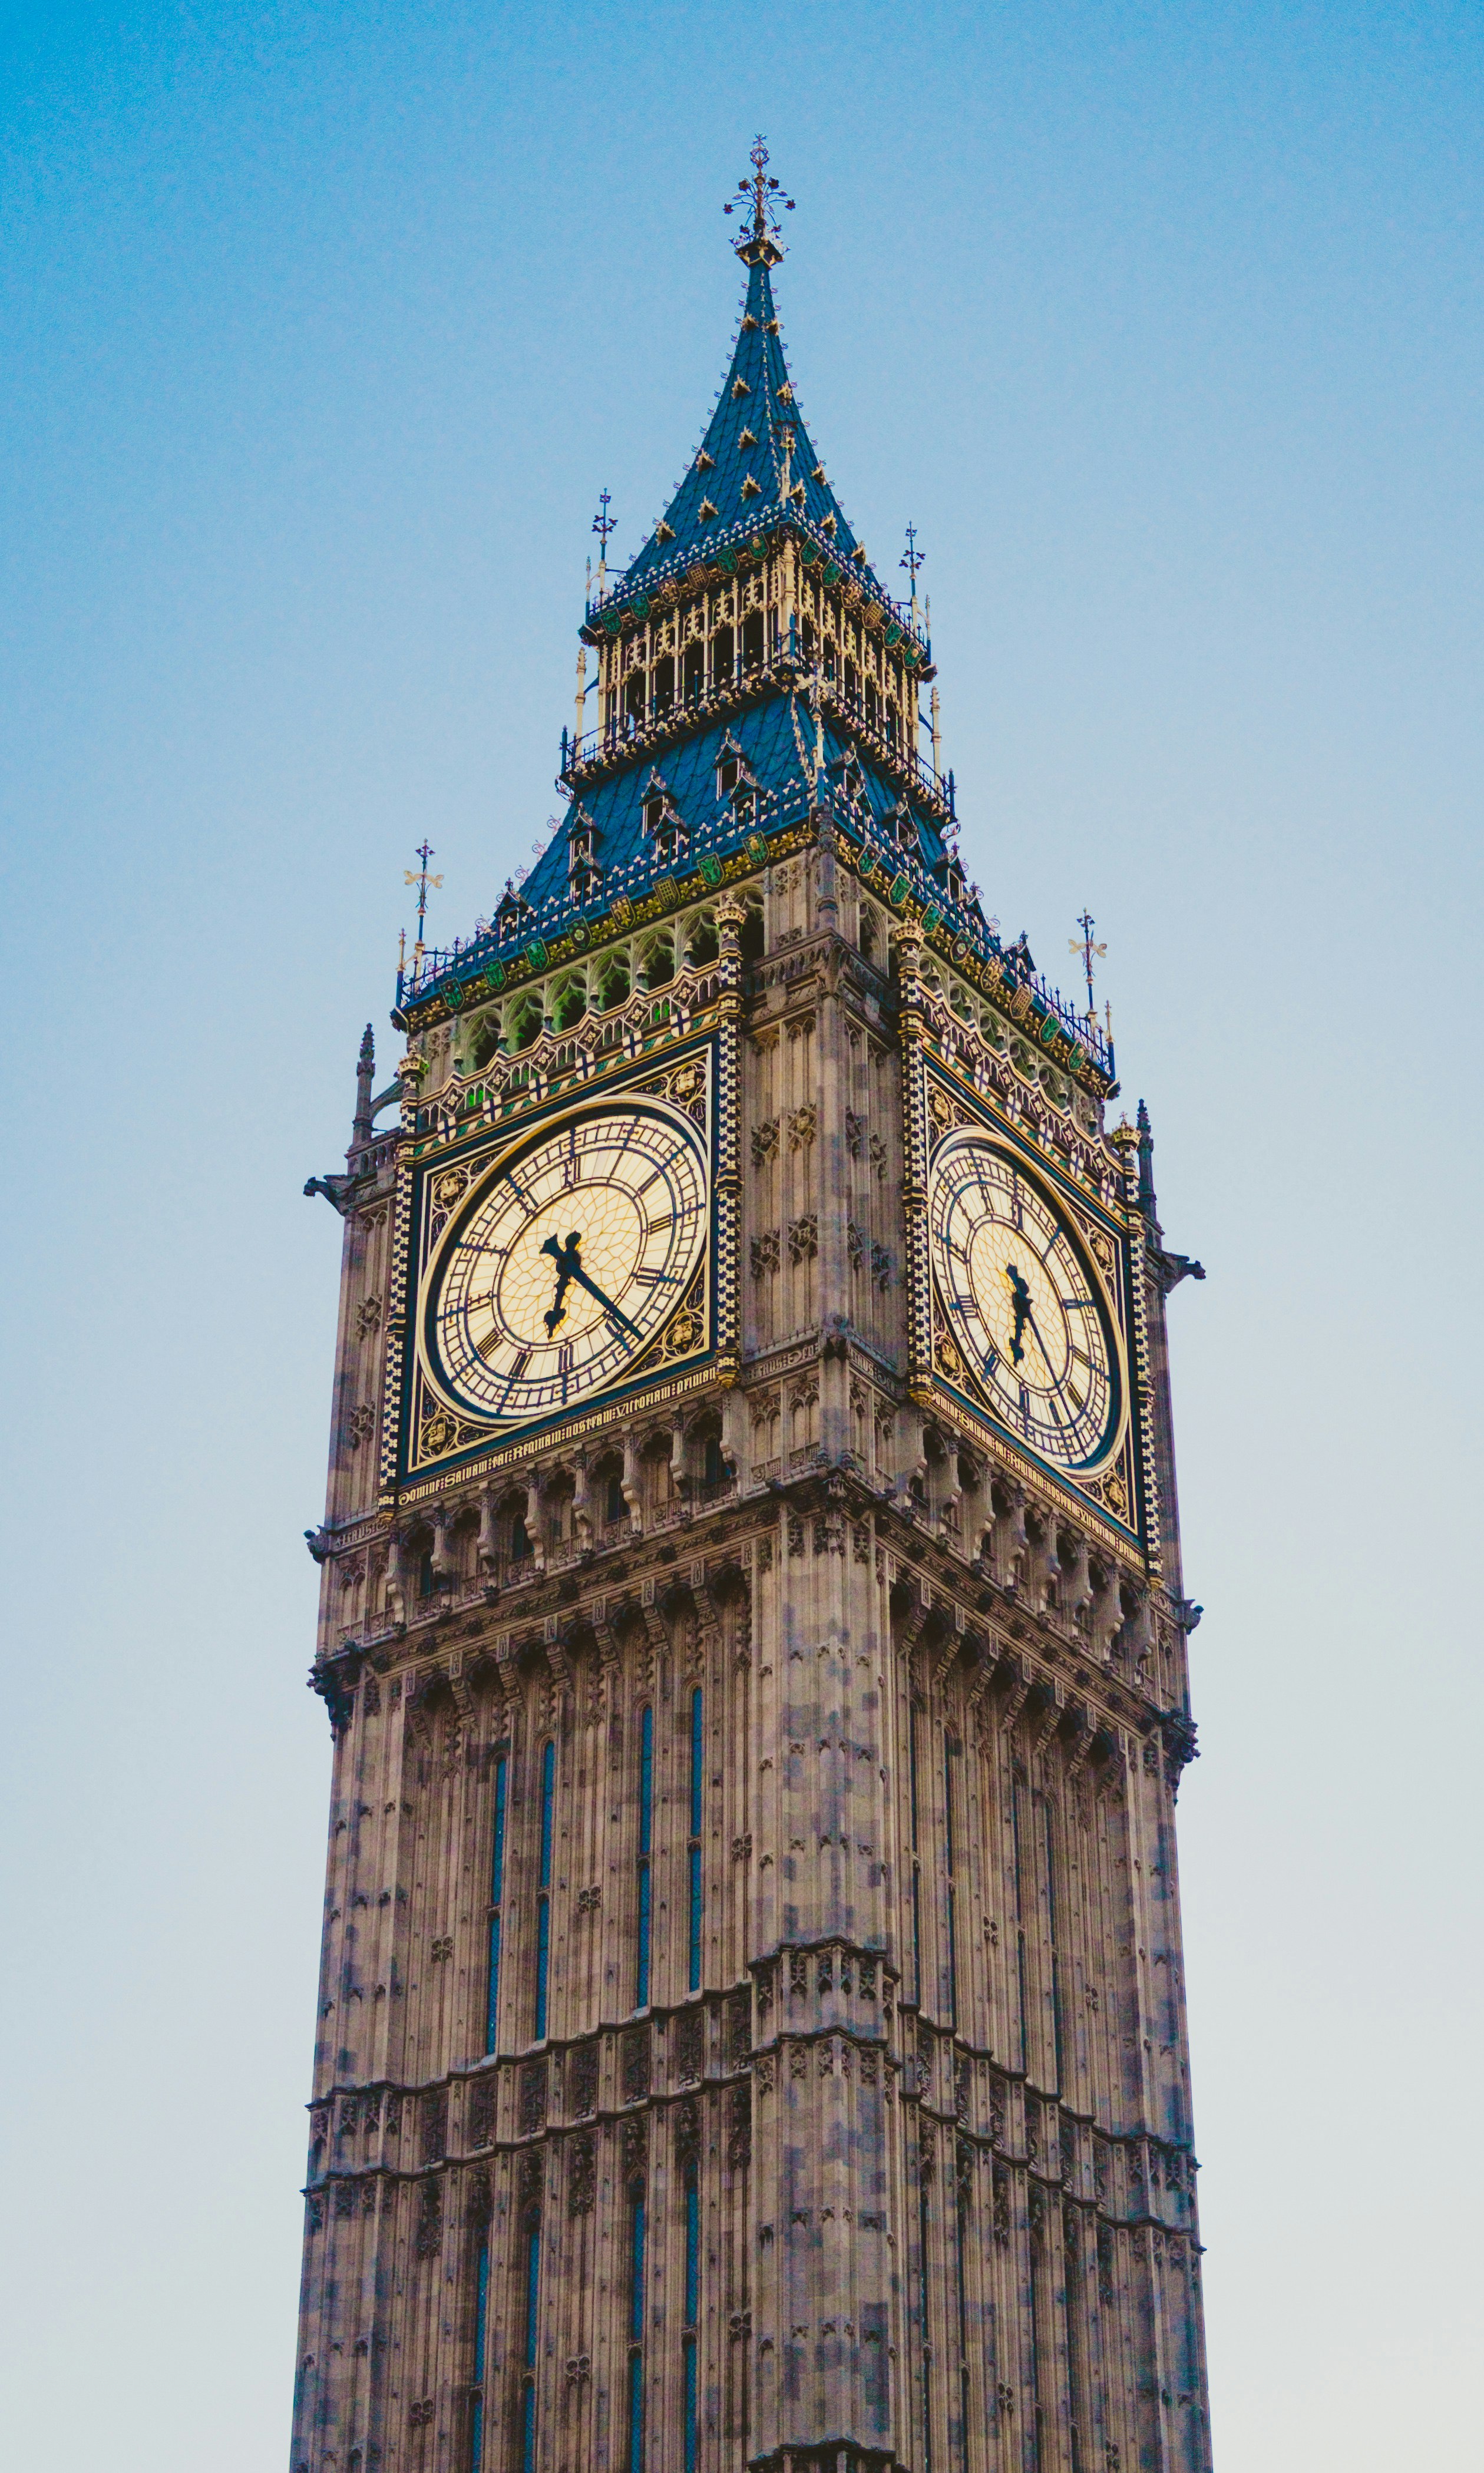 Up and close with Big Ben